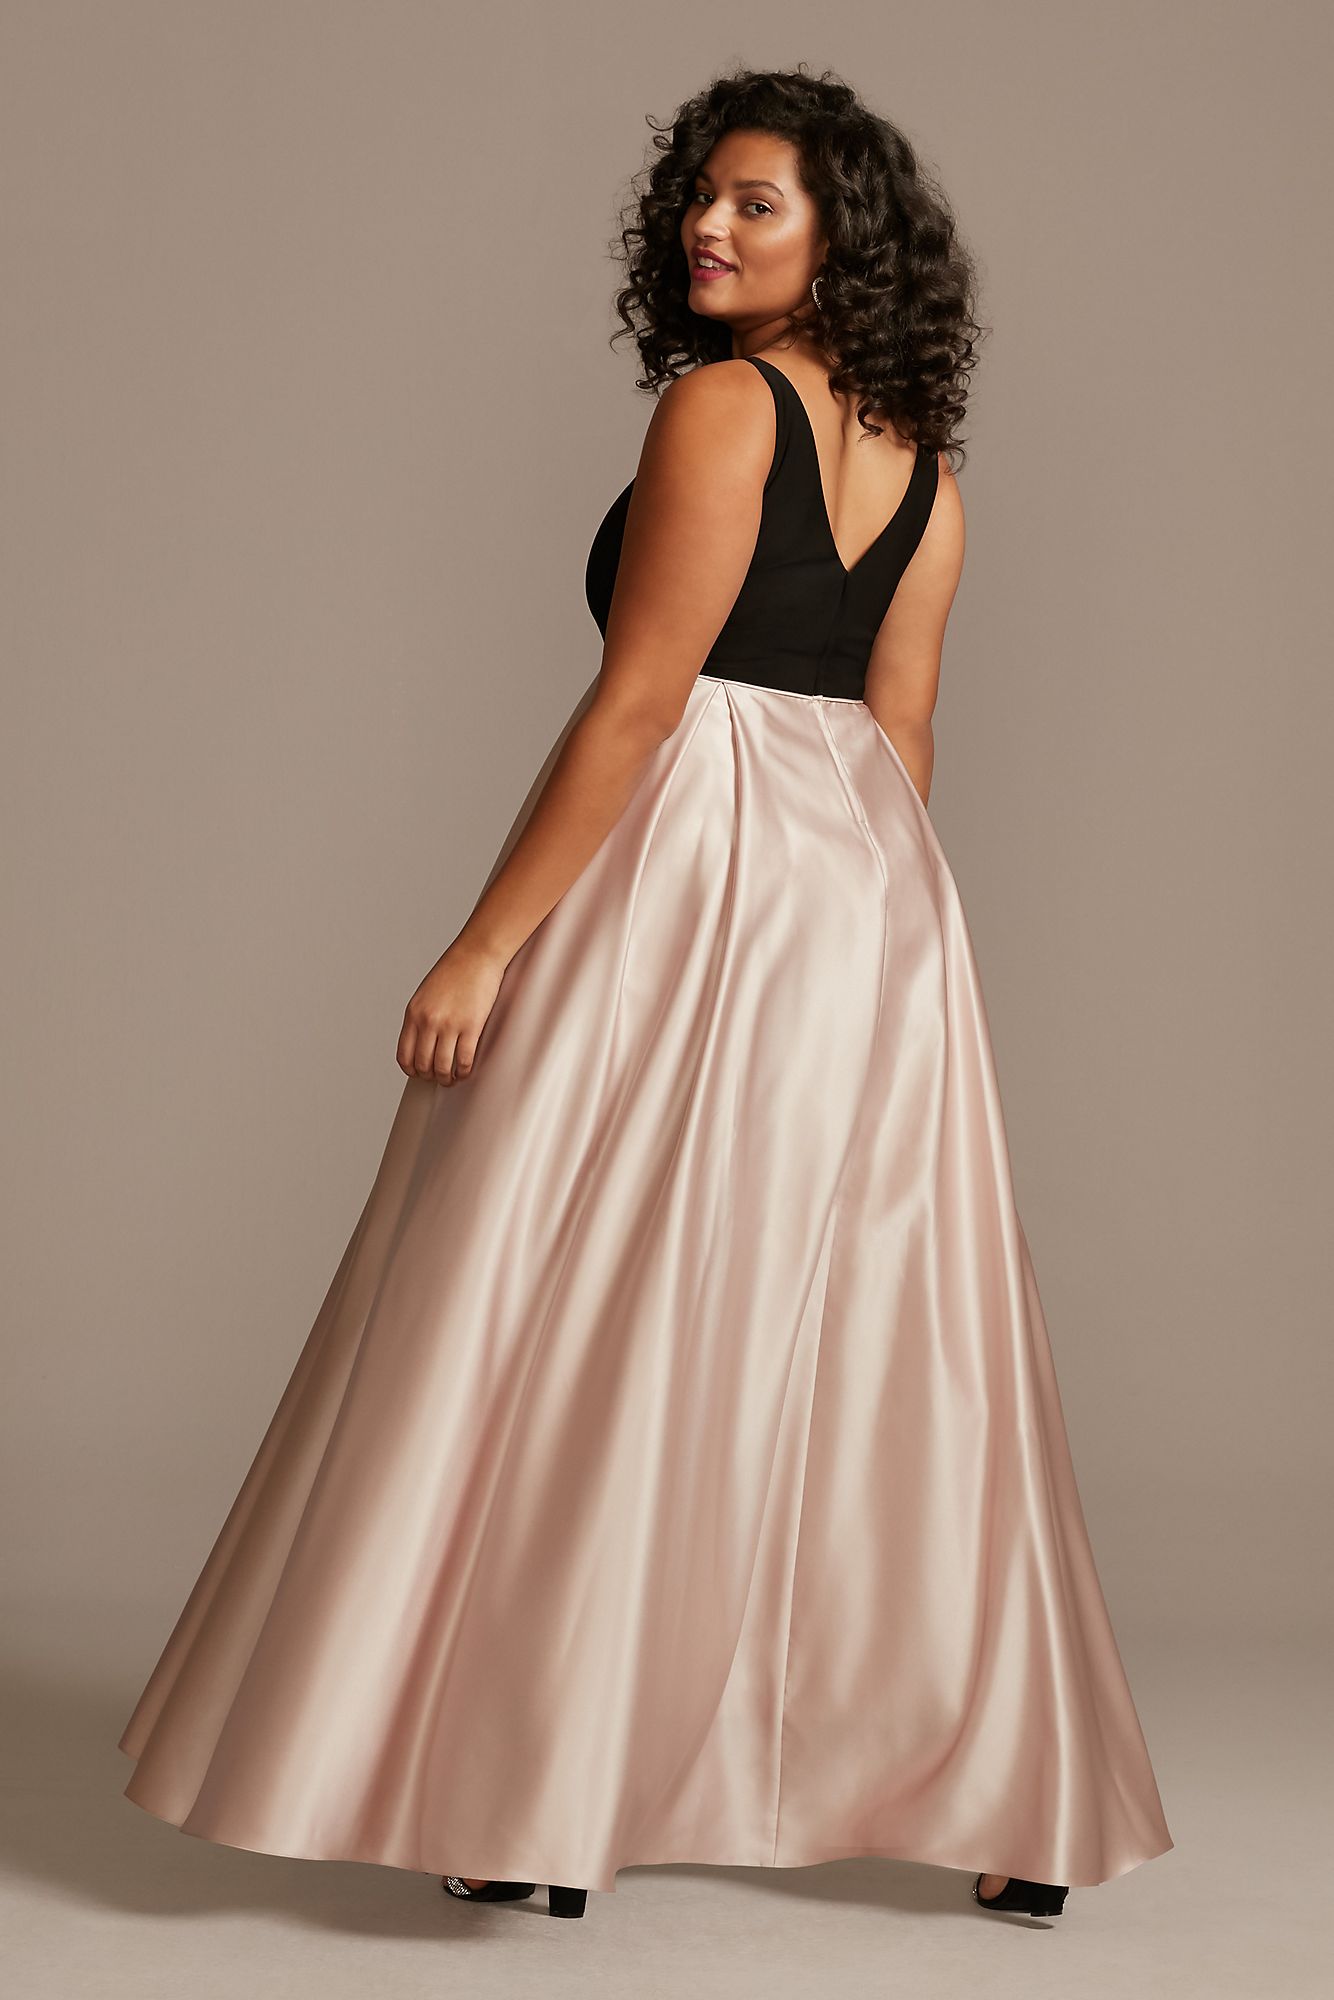 Satin Skirt Plunging-V Plus Size Gown with Pockets 2004BNW